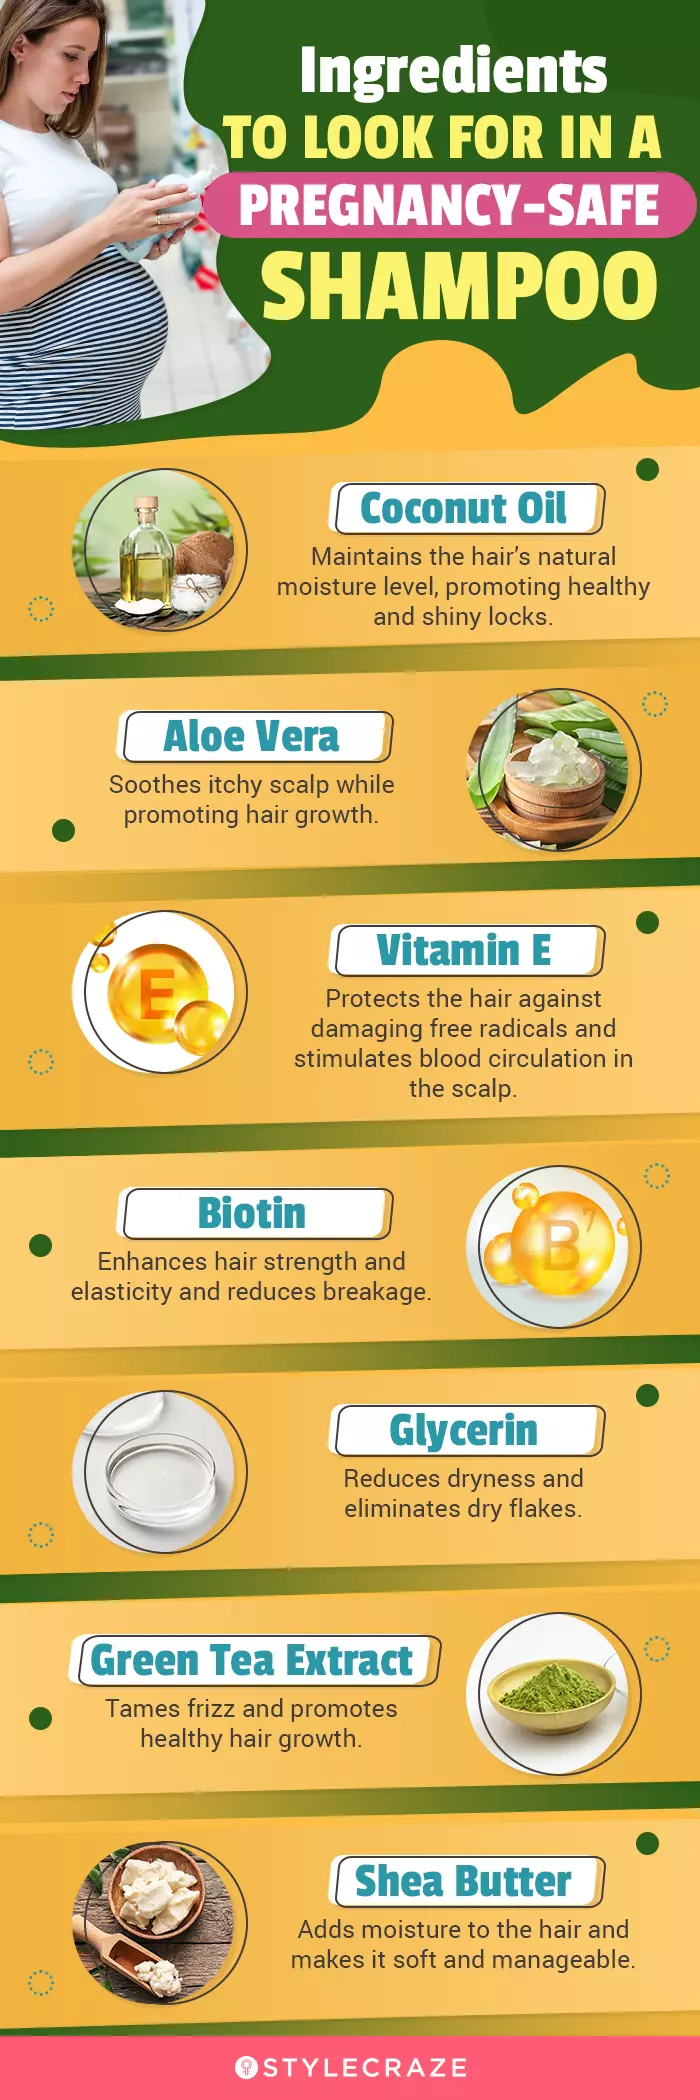 Ingredients To Look For In A Pregnancy-Safe Shampoo (infographic)